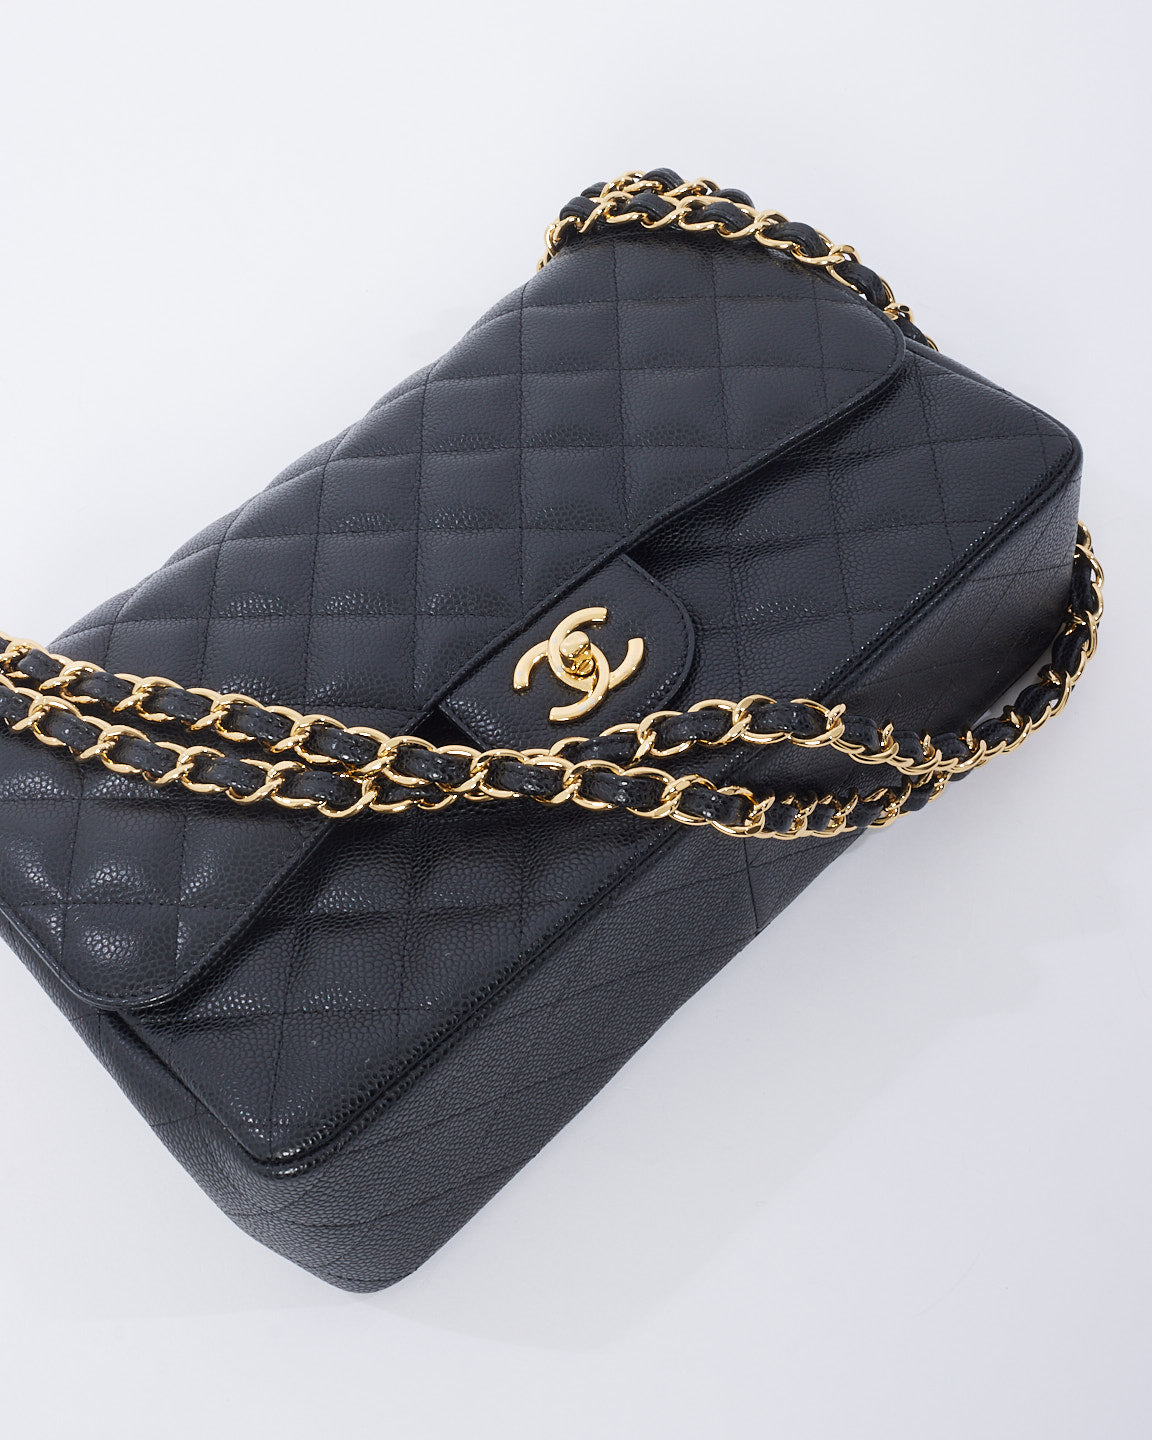 Chanel Black Caviar Leather Jumbo Classic Double Flap with GHW